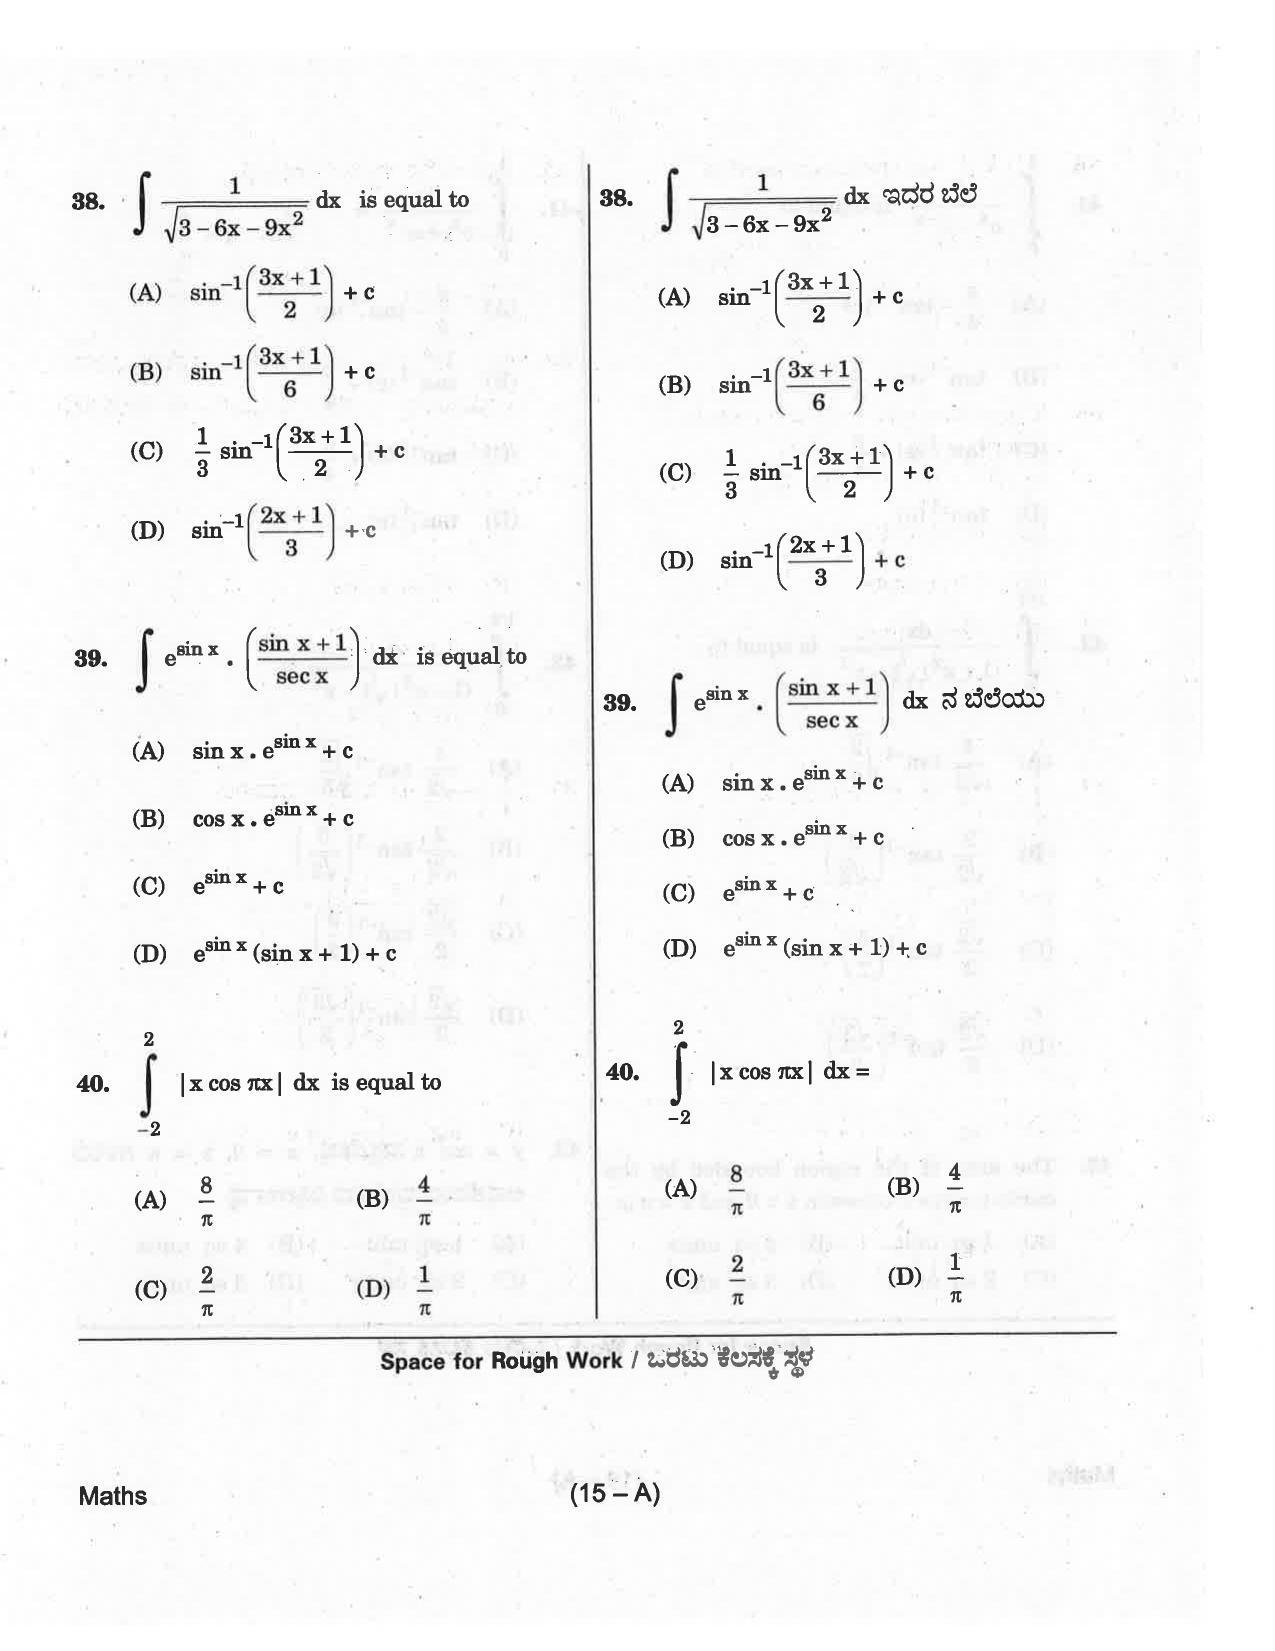 KCET Mathematics 2018 Question Papers - Page 15